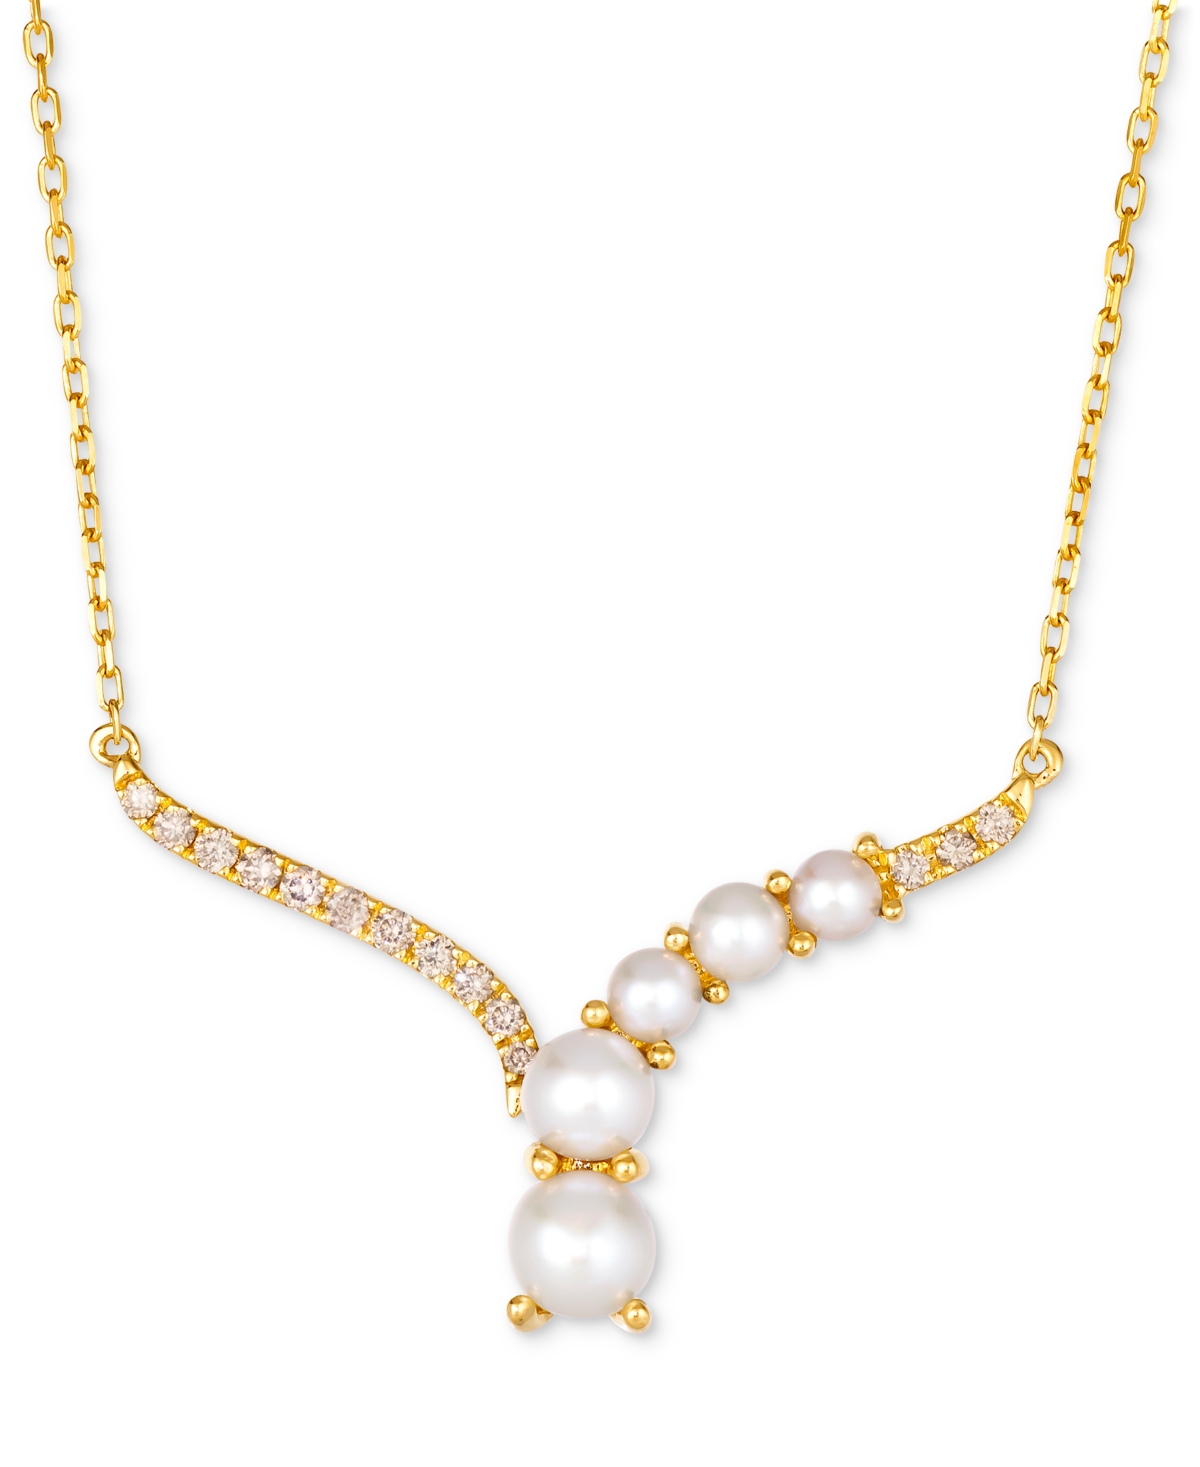 Le Vian Vanilla Pearls (3-6mm) & Nude Diamond (1/6 Ct. T.w.) Adjustable 19" Statement Necklace In 14k Gold In K Honey Gold Adjustable Necklace